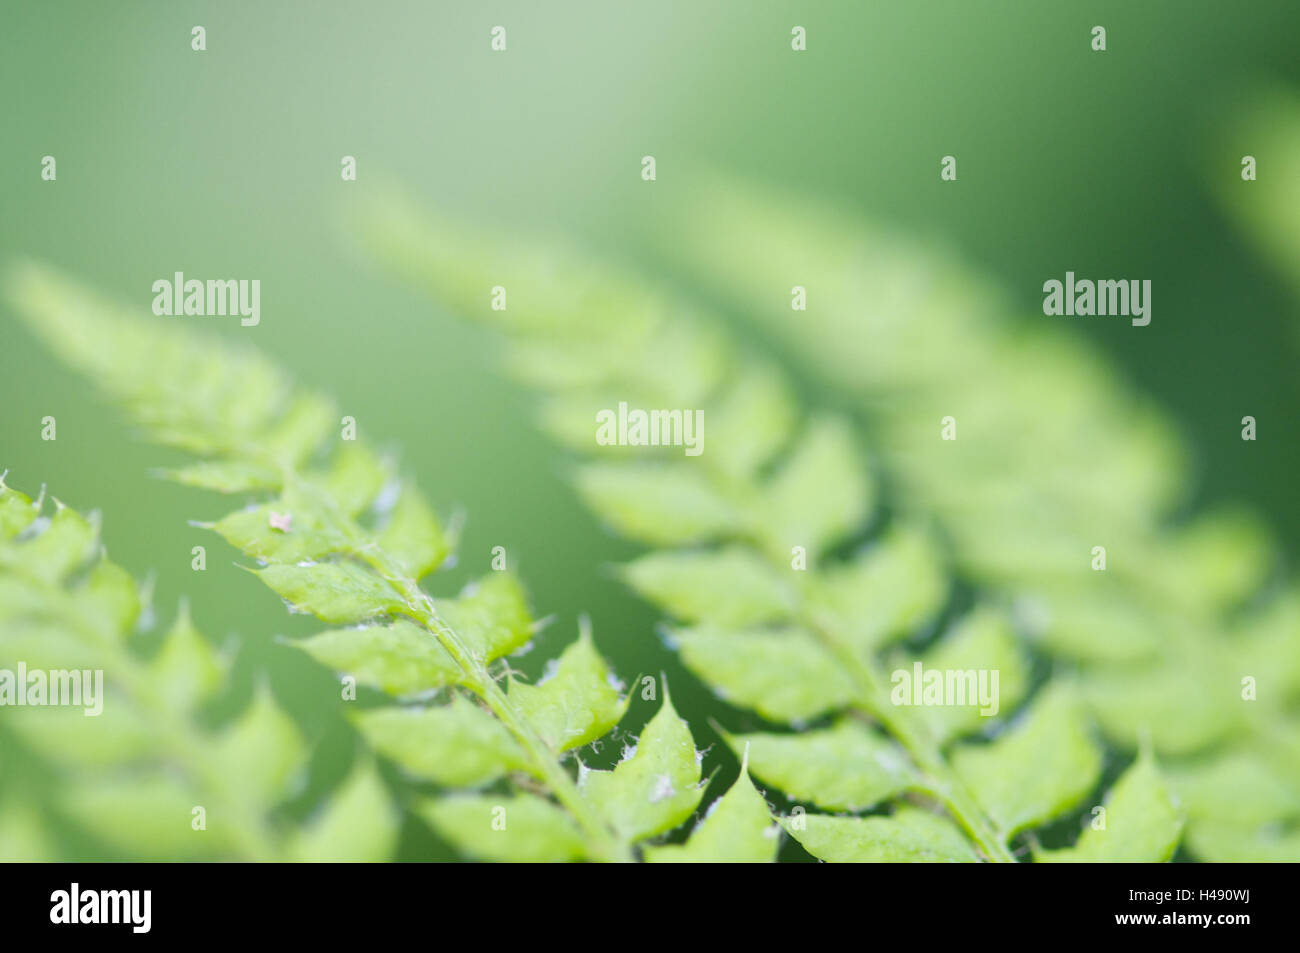 Scaly male fern, leaves, close-up, detail, Stock Photo